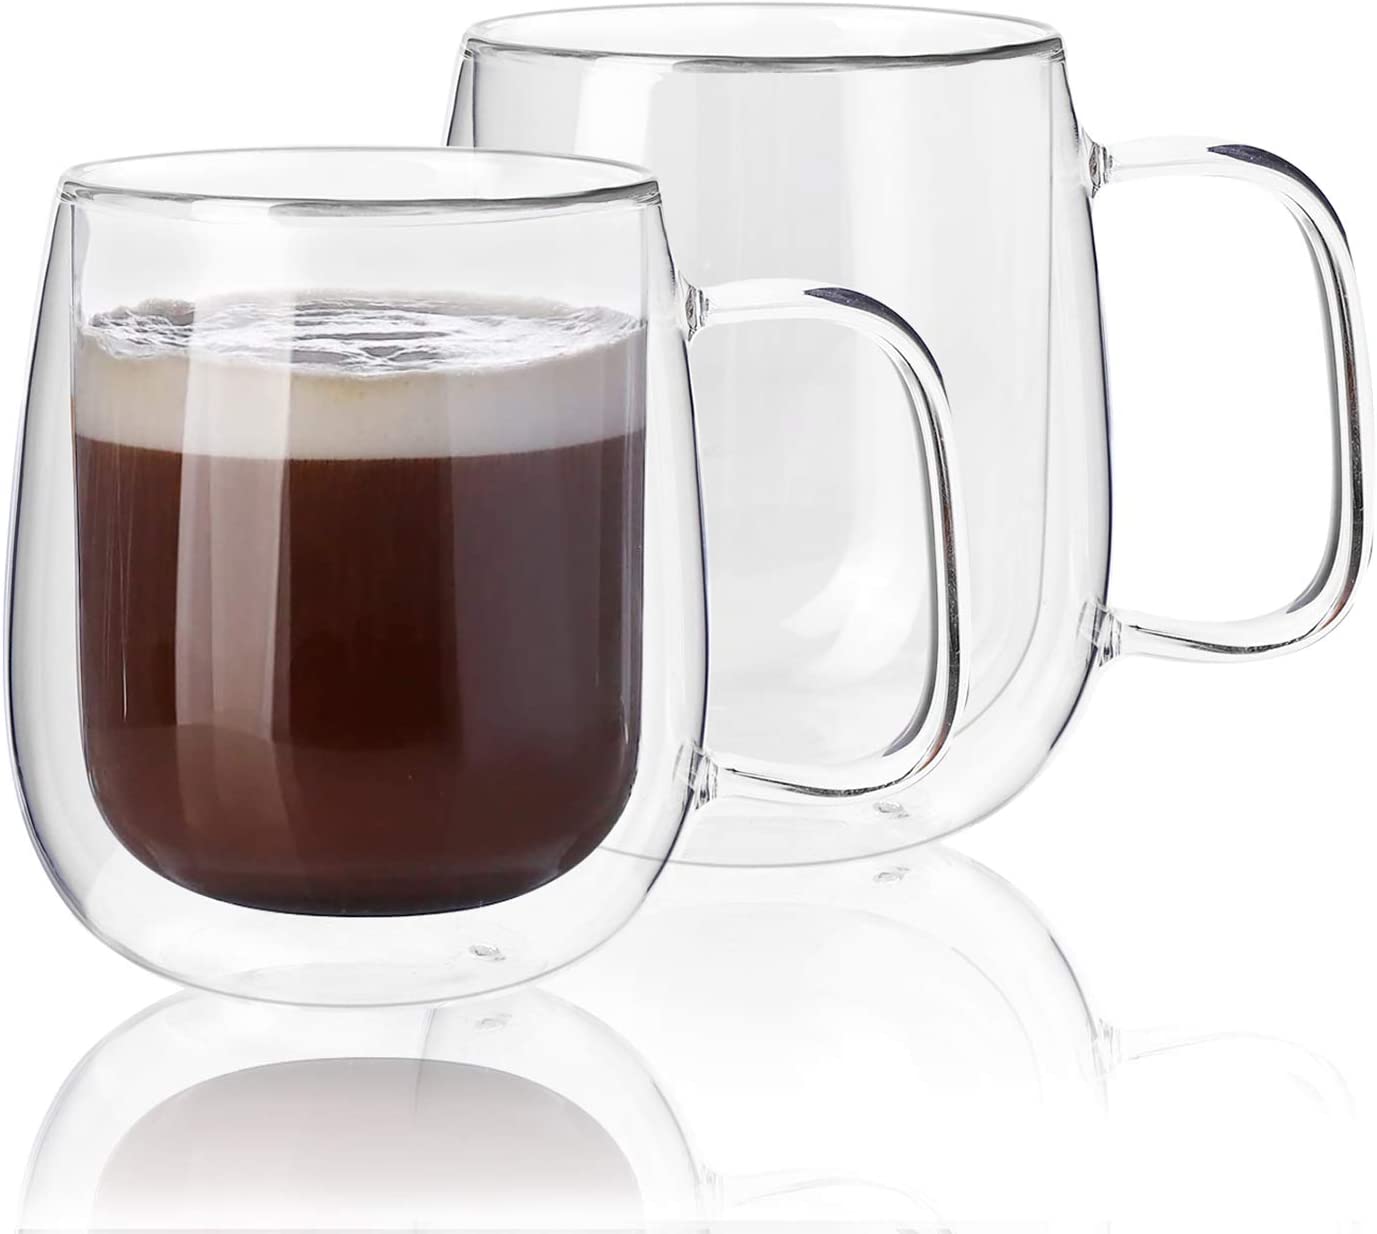 Sweese 416.101 Glass Coffee Mugs Set of 2 - Double Wall Tall Insulated Tea  Cup with Handle Glassware, Perfect for Cappuccino, Latte, Macchiato, Tea